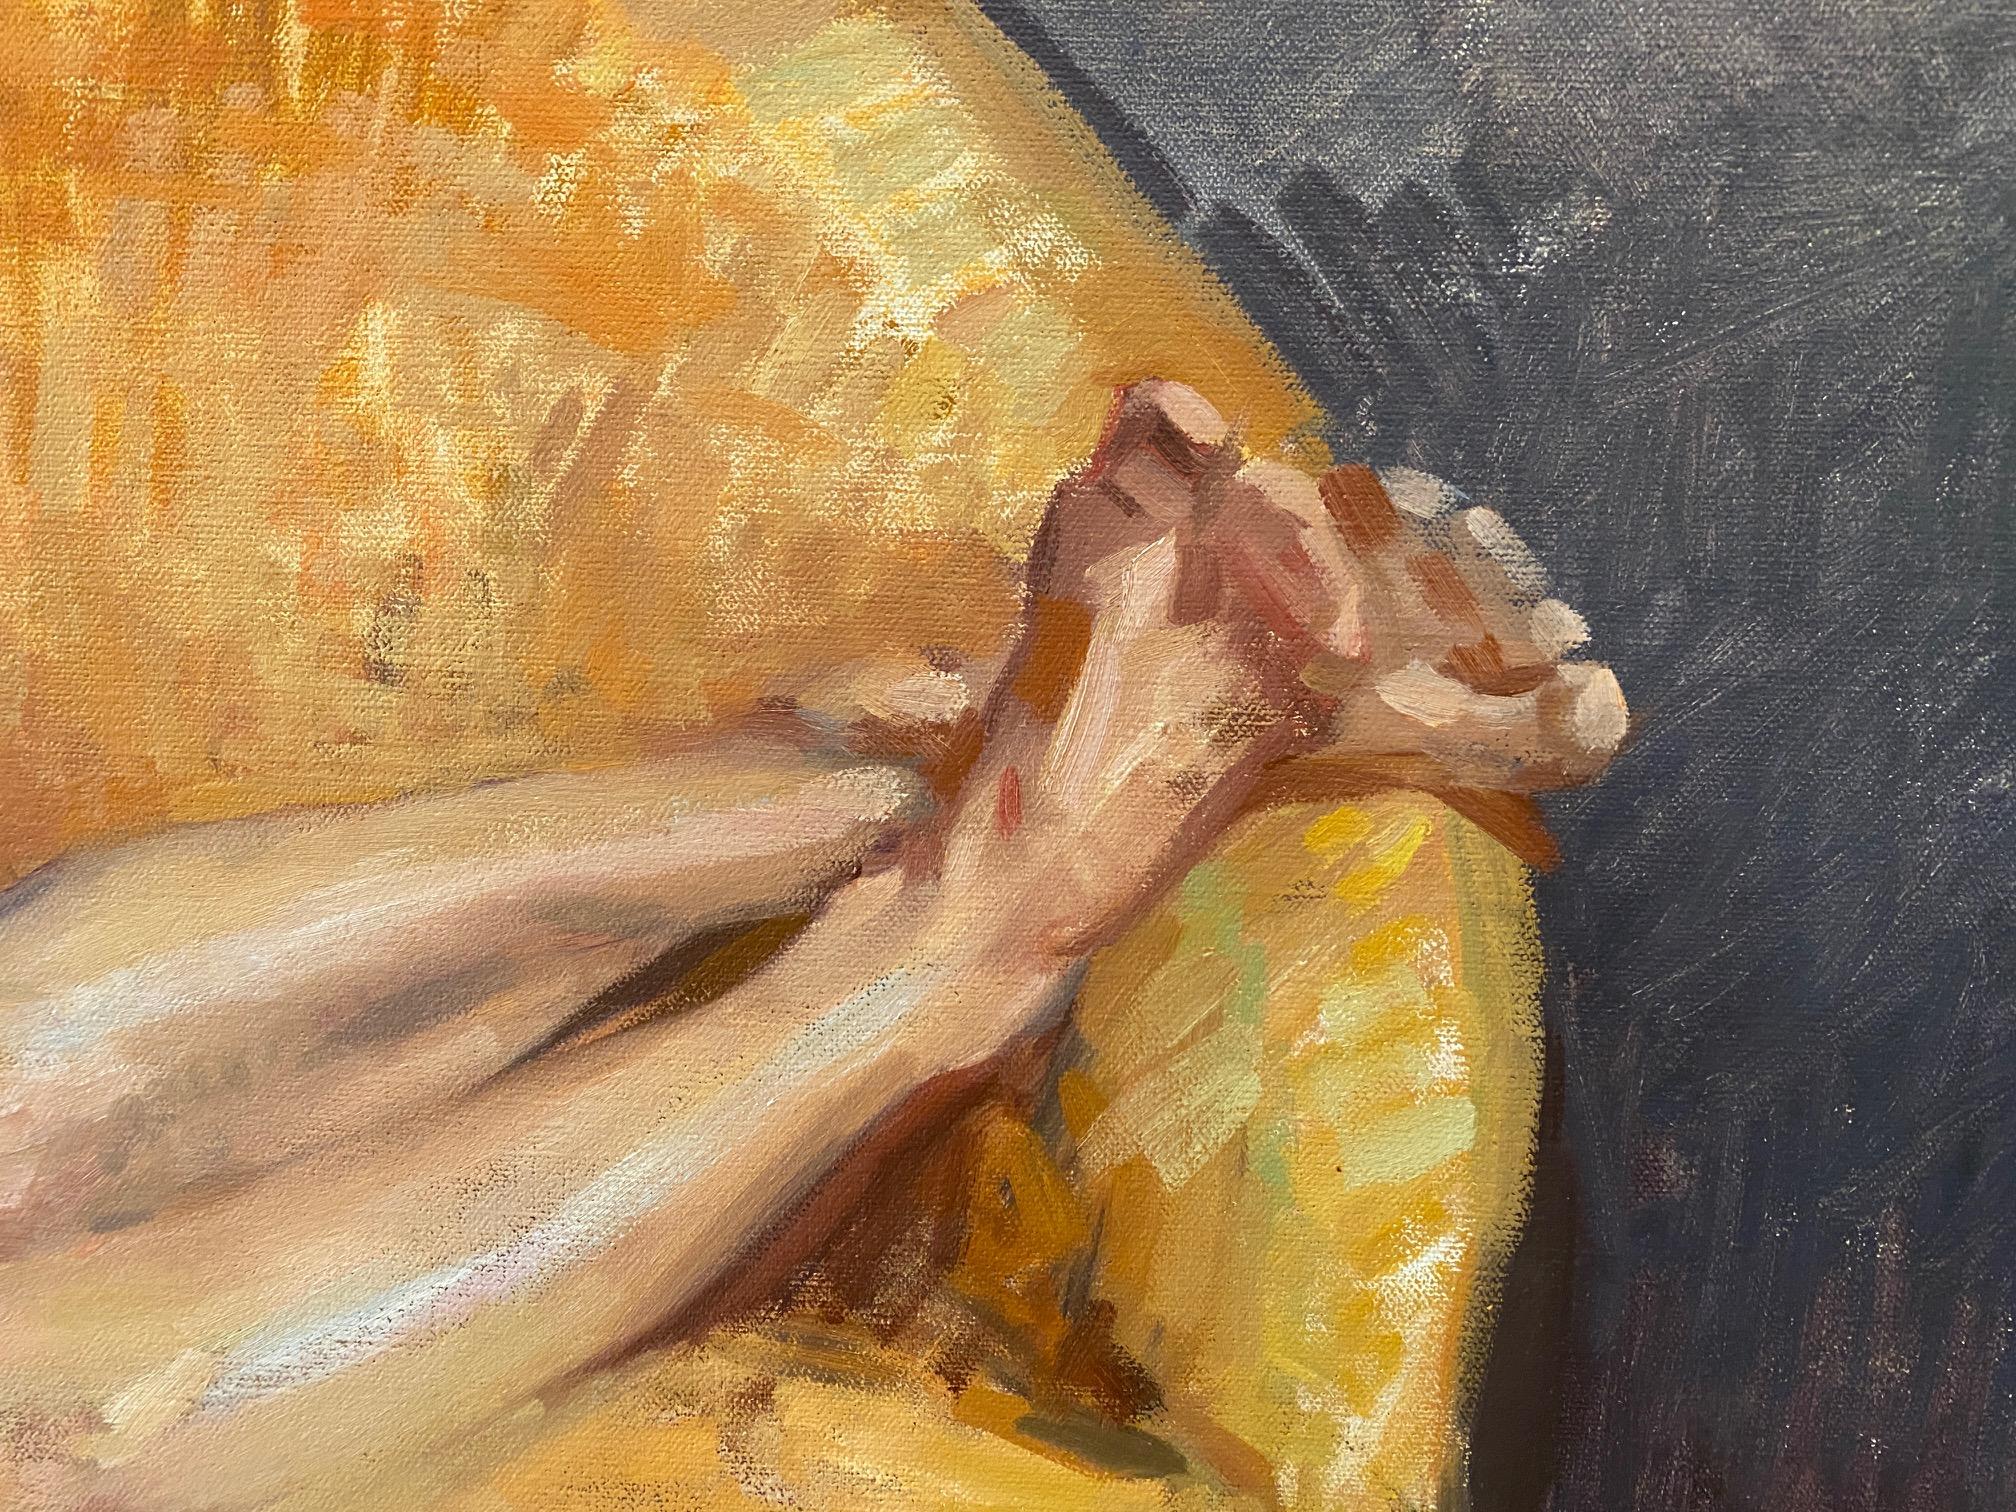 An oil painting of a nude woman, reclining on a bright orange-yellow velvet sofa. A contemporary depiction of a classic subject; the reclining nude. 

Painting dimensions: 25.59 x 39.5 inches
Framed dimensions: 30.5 x 44.5 x 3 inches

Amy Florence